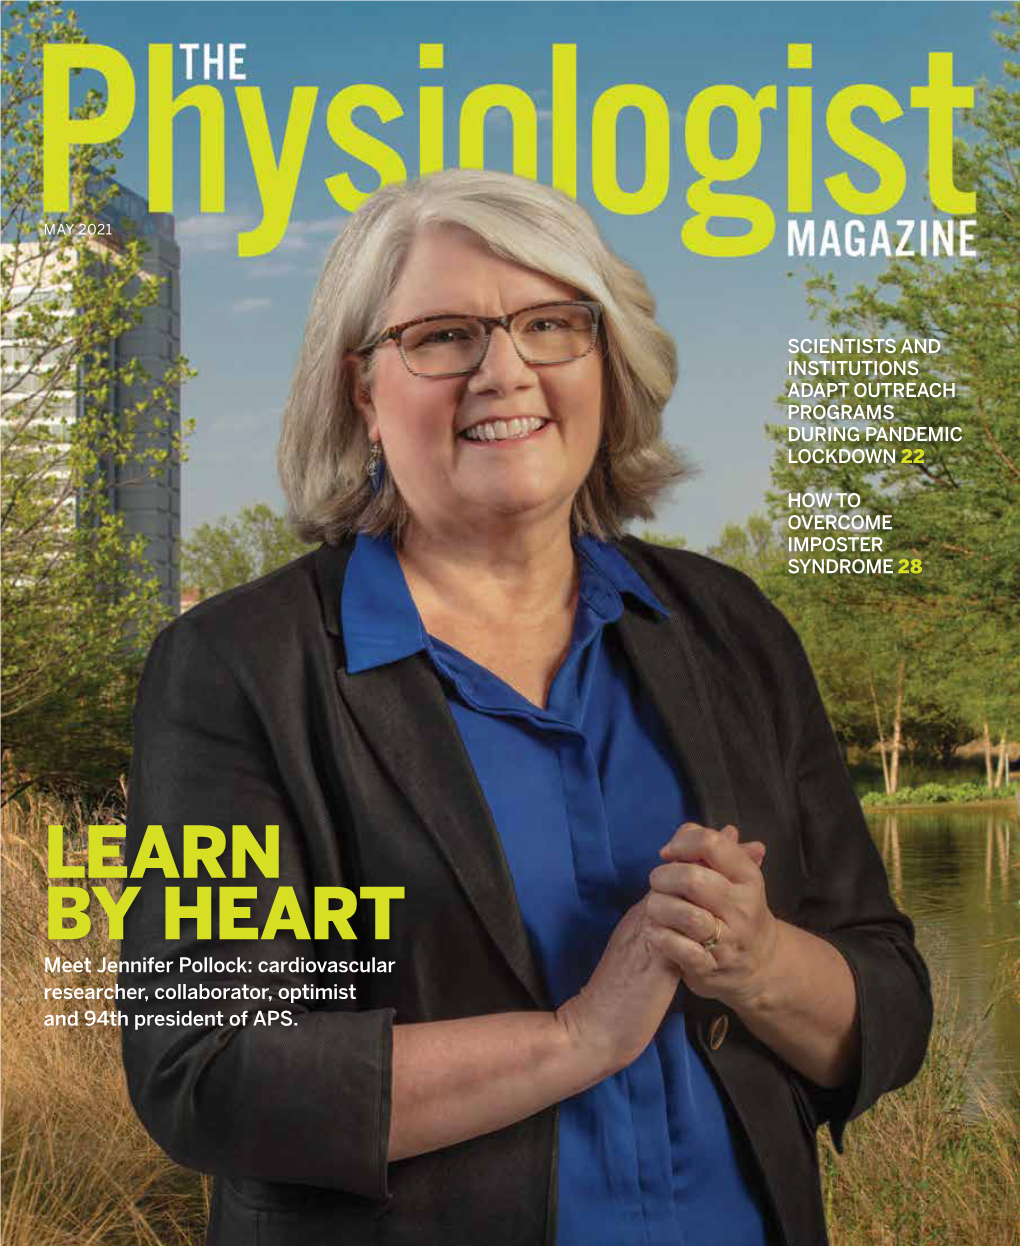 LEARN by HEART Meet Jennifer Pollock: Cardiovascular Researcher, Collaborator, Optimist and 94Th President of APS